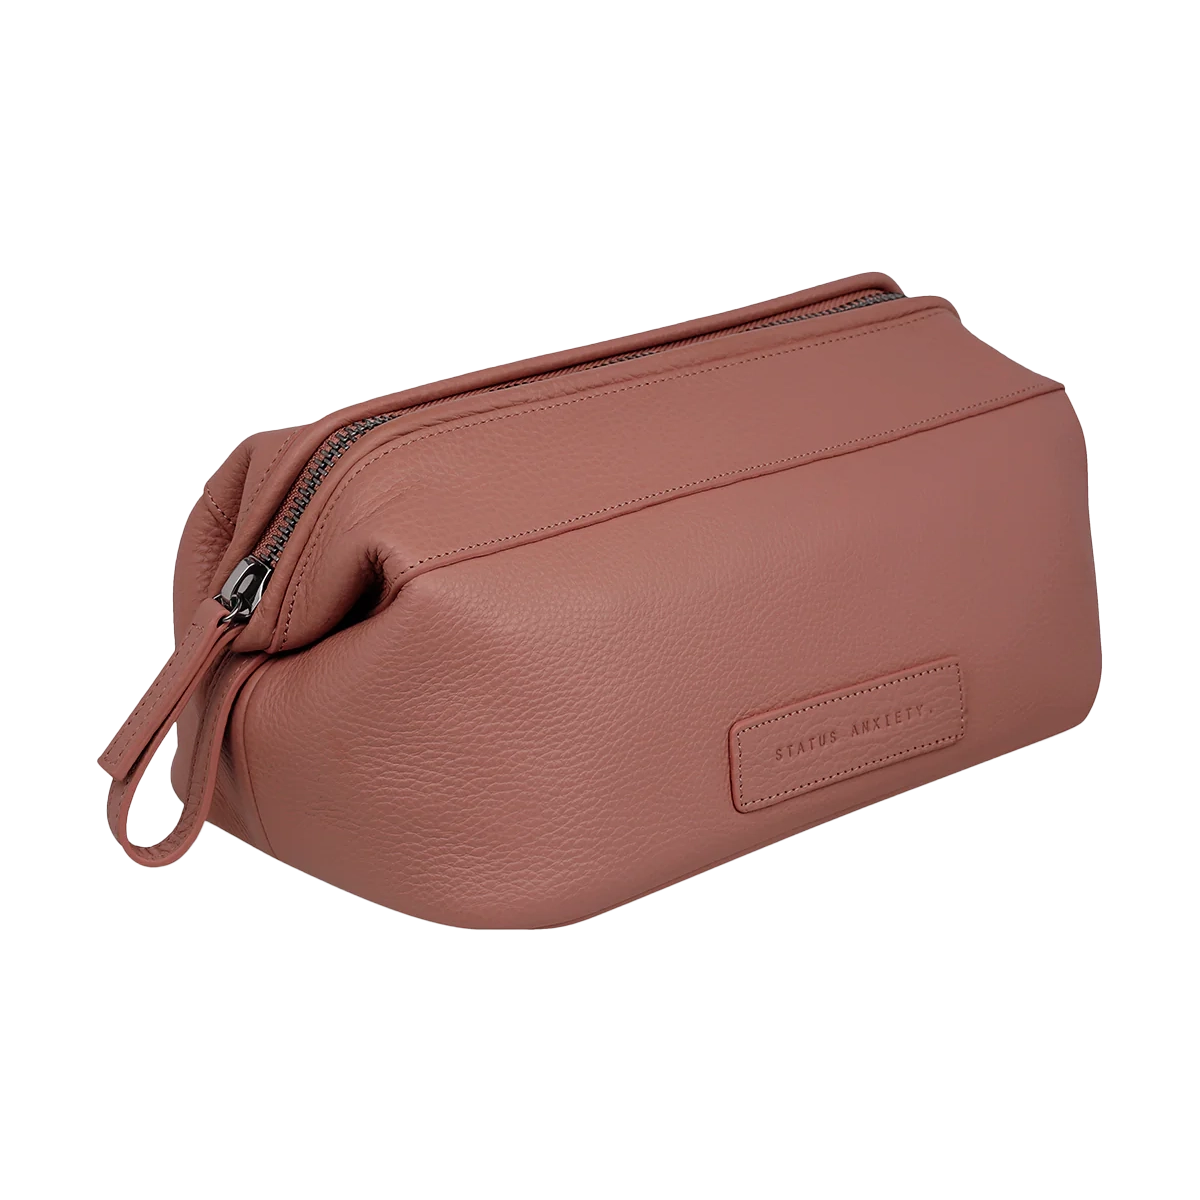 Status Anxiety leather toiletry bag dusty rose